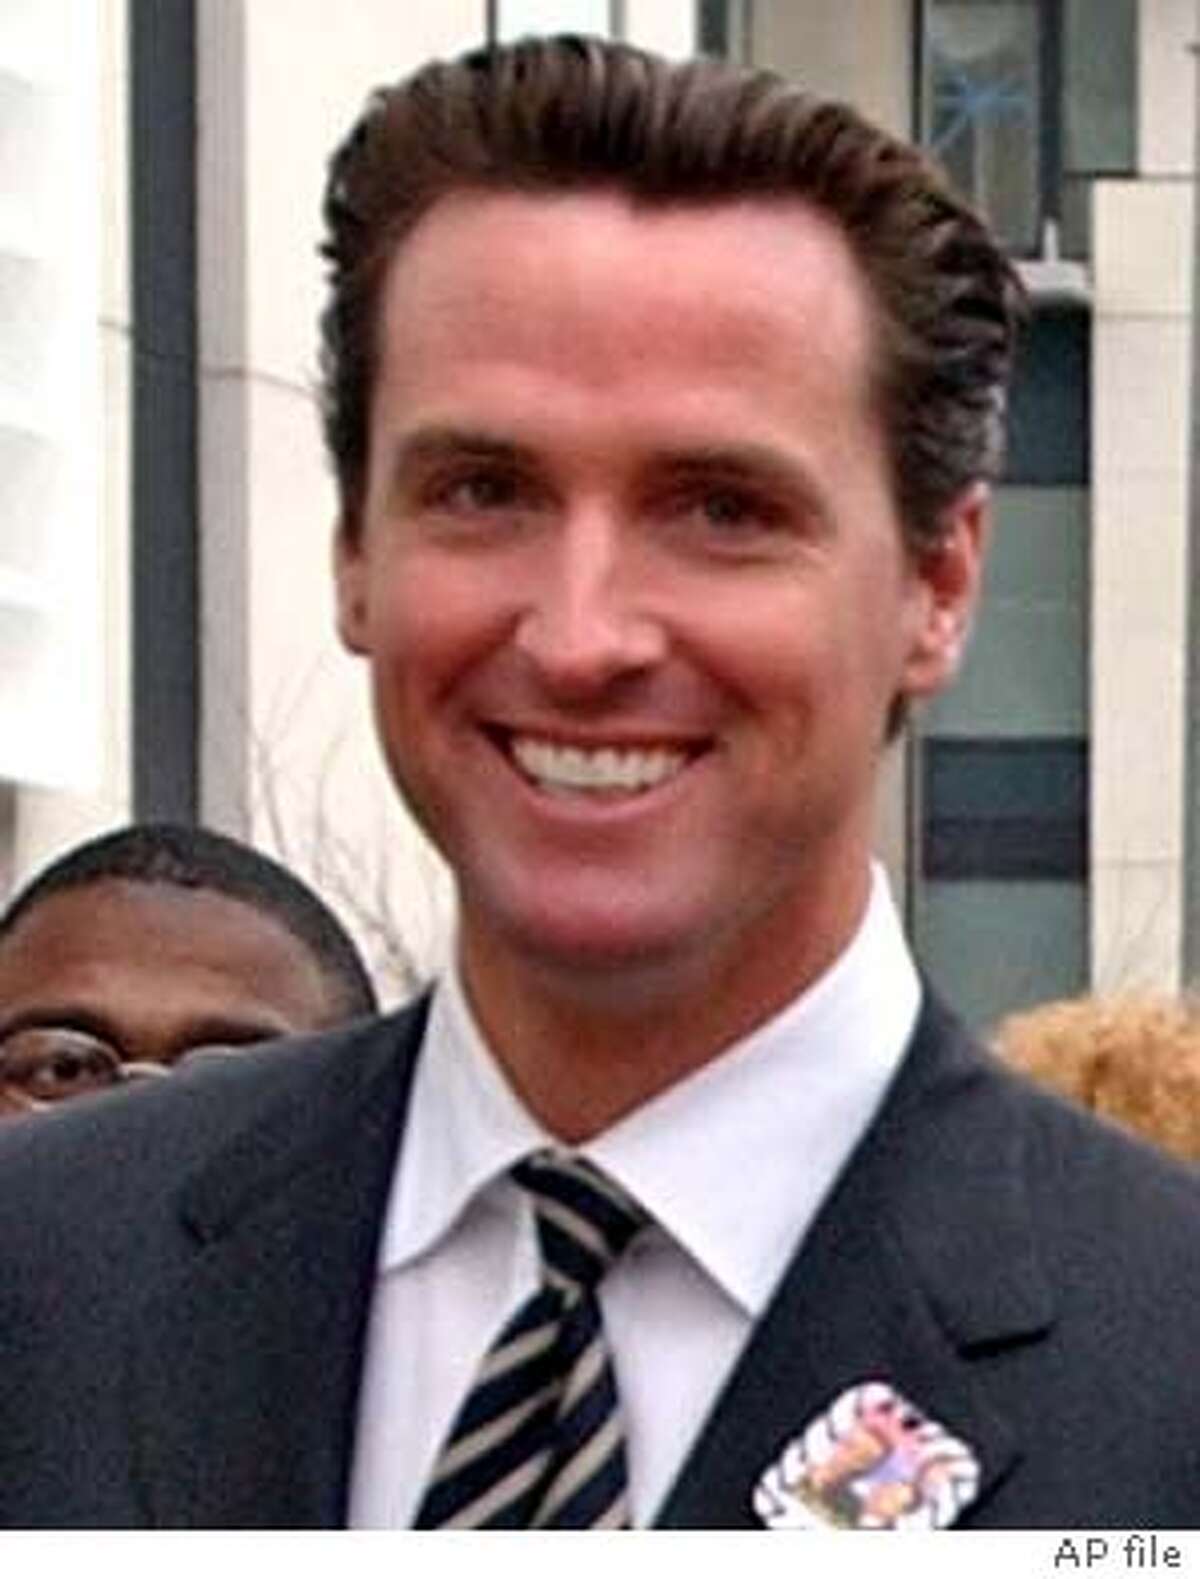 ** FILE ** San Francisco Mayor Gavin Newsom, left, new San Francisco District Attorney Kamala Harris, right, and Rev. Cecil Williams, center, of the Glide Memorial Methodist Church, in San Francisco, help lead a march in San Francisco celebrating Dr. Martin Luther King, Jr., Monday, Jan. 19. 2004. As San Francisco's youngest mayor in more than a century, Newsom pledged to usher in a new generation of leadership. But it's the gender of his appointees, not their ages, that is raising eyebrows here and beyond. Newsom, a 36-year-old Democrat, has promoted women to lead both the police and fire departments, a national first for a city anywhere near San Francisco's size. (AP Photo/Paul Sakuma) Gavin Newsom